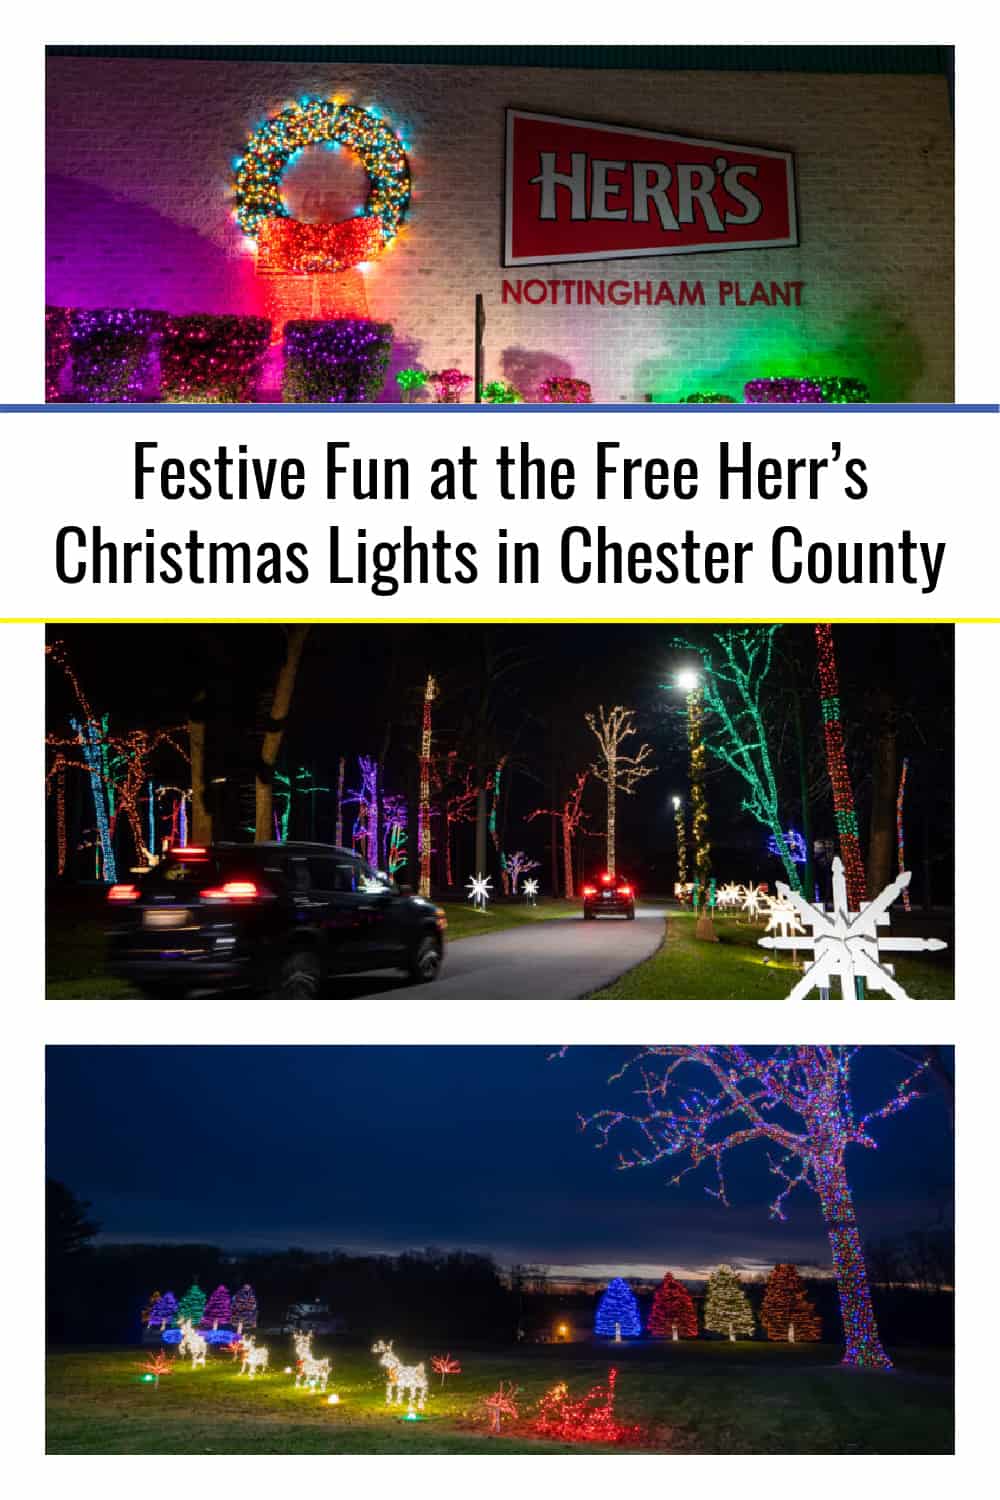 Festive Fun at the Free Herr's Christmas Lights in Chester County